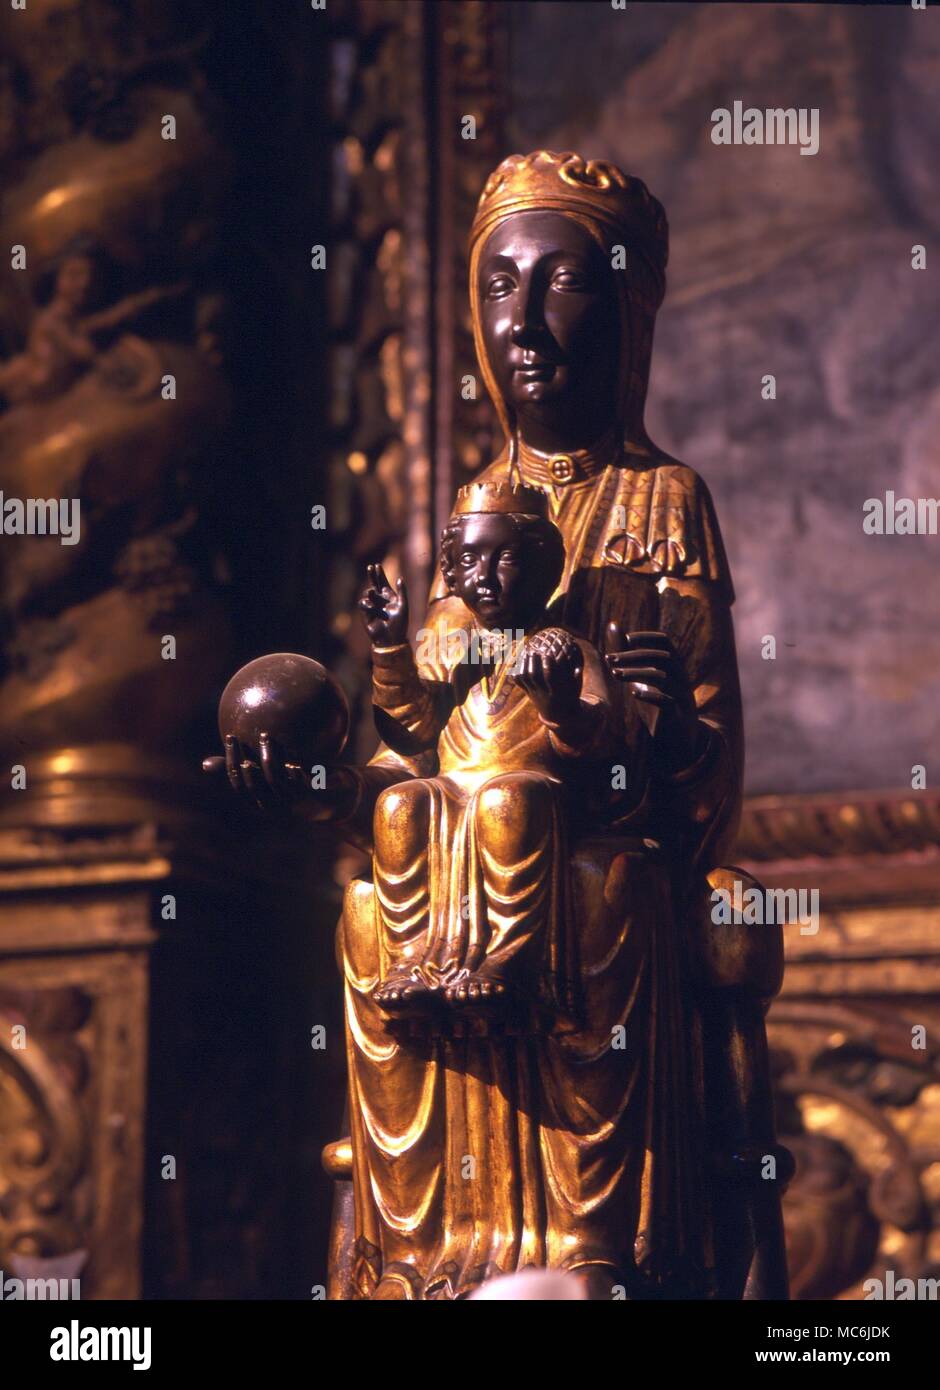 BLACK VIRGINS - SAN CUGAT DEL VALLES. The Black Virgin in the Monastic church of San Cugat del Valles (near Barcelona, Spain). This is a copy of the one in Montserrat Stock Photo